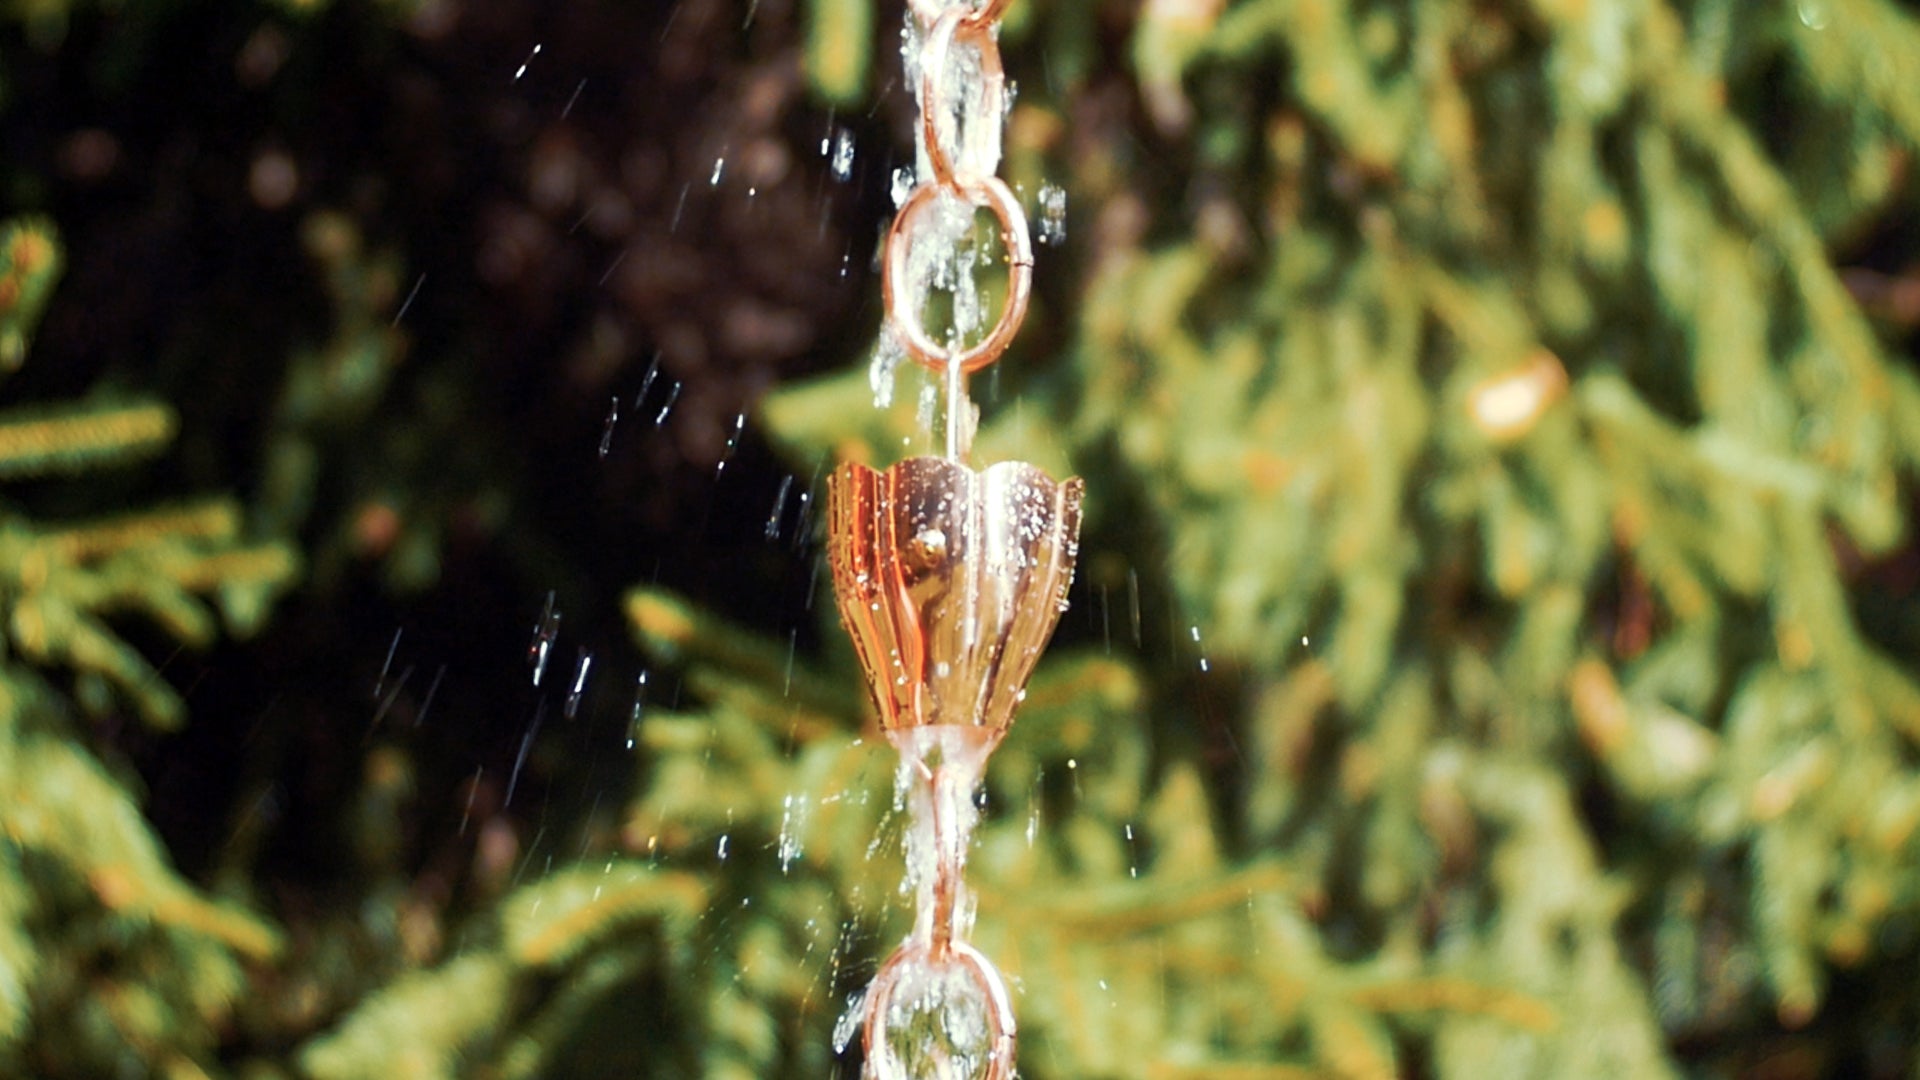 Crocus Rain Chain - 8.5 ft.,with 9 Large Cups - Good Directions